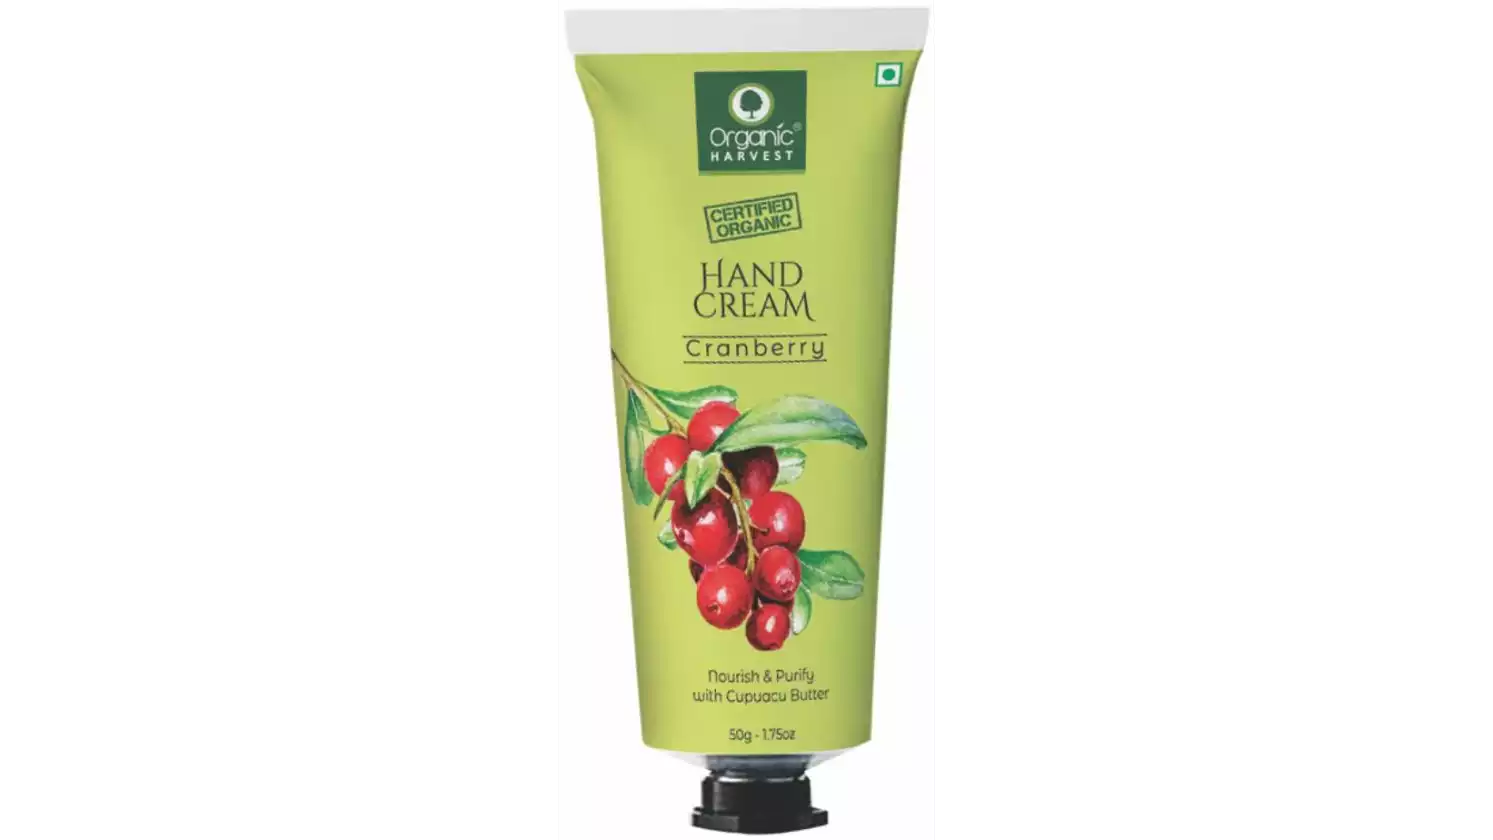 Organic Harvest Hand Cream, Cranberry, Nourish & Purify with Cupuacu Butter (50g)